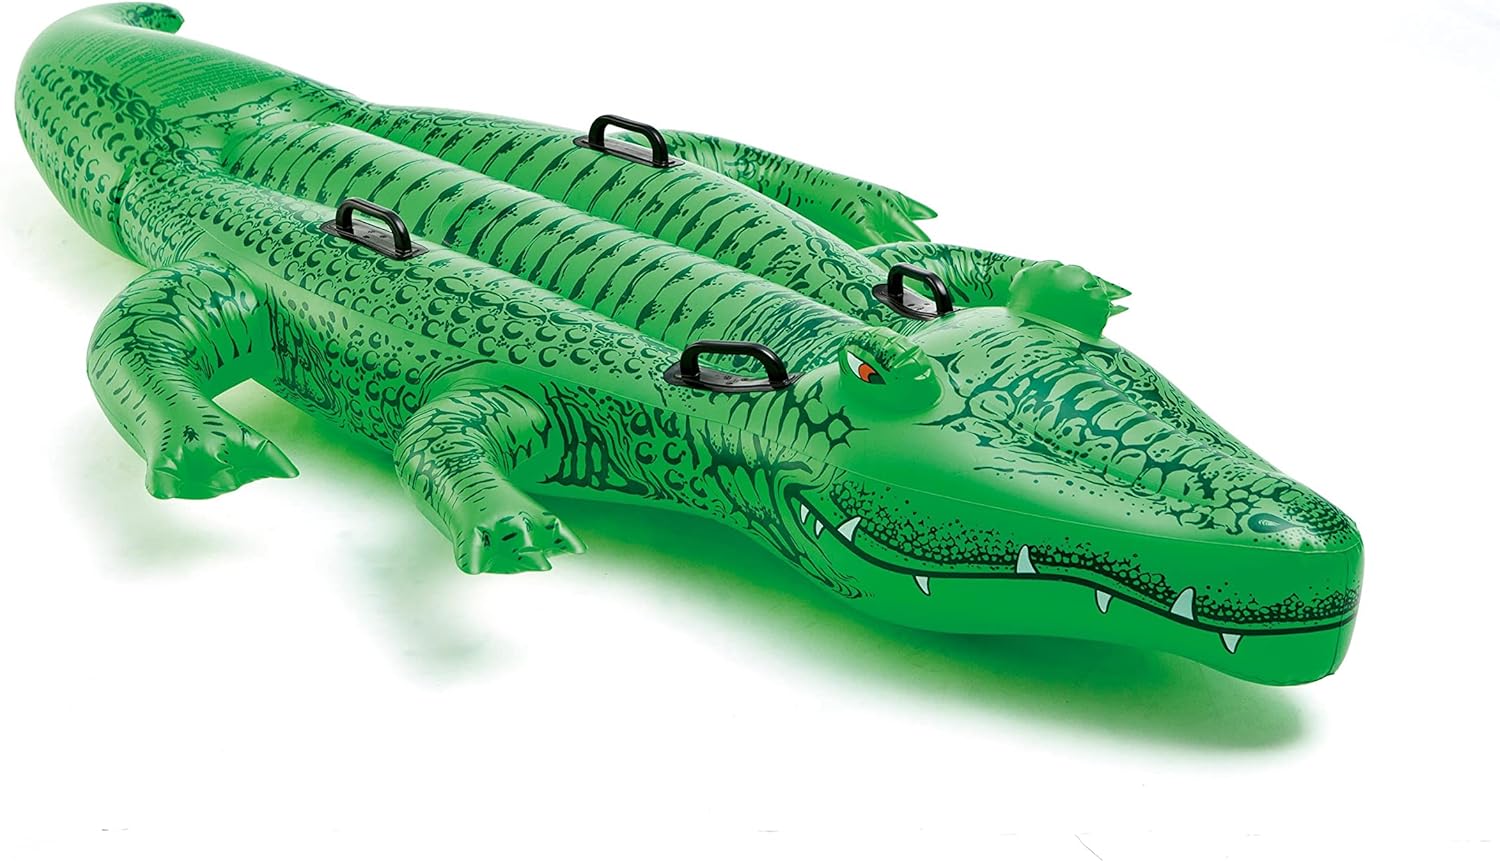 Intex Giant Gator Ride-On, 80 X 45, for Ages 3+